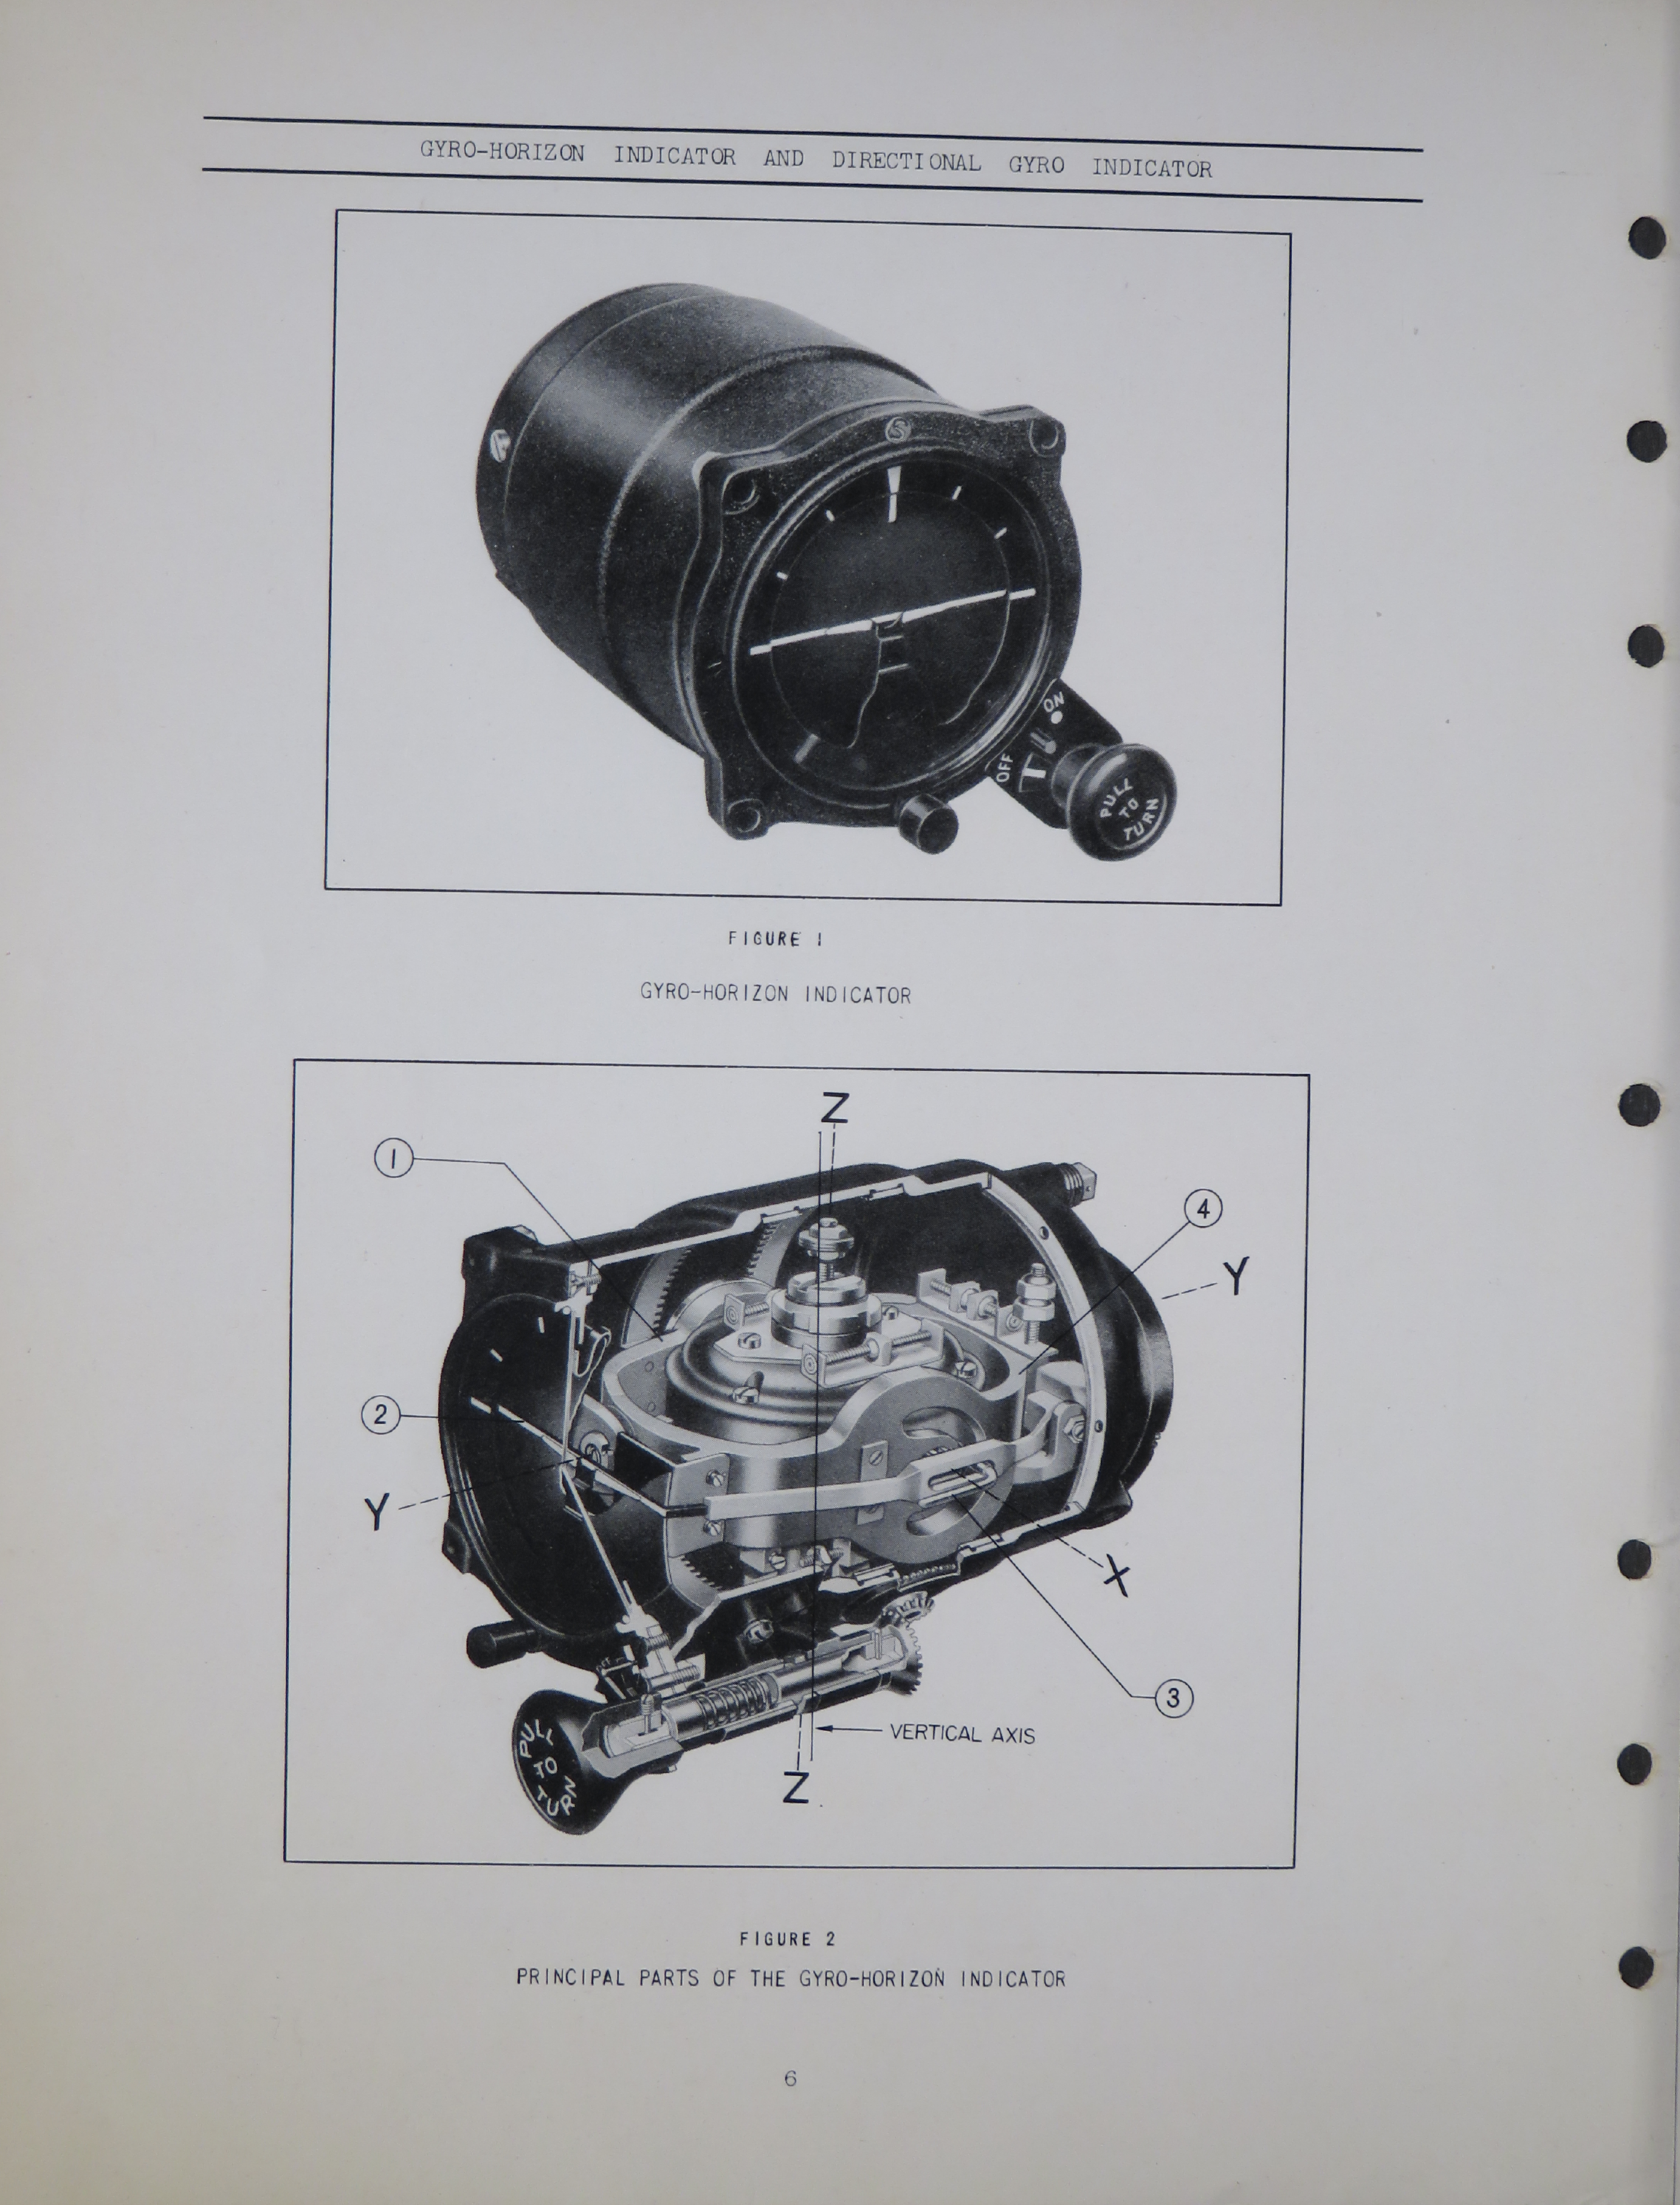 Sample page 6 from AirCorps Library document: Gyro-Horizon Indicator and Directional Gyro Indicator